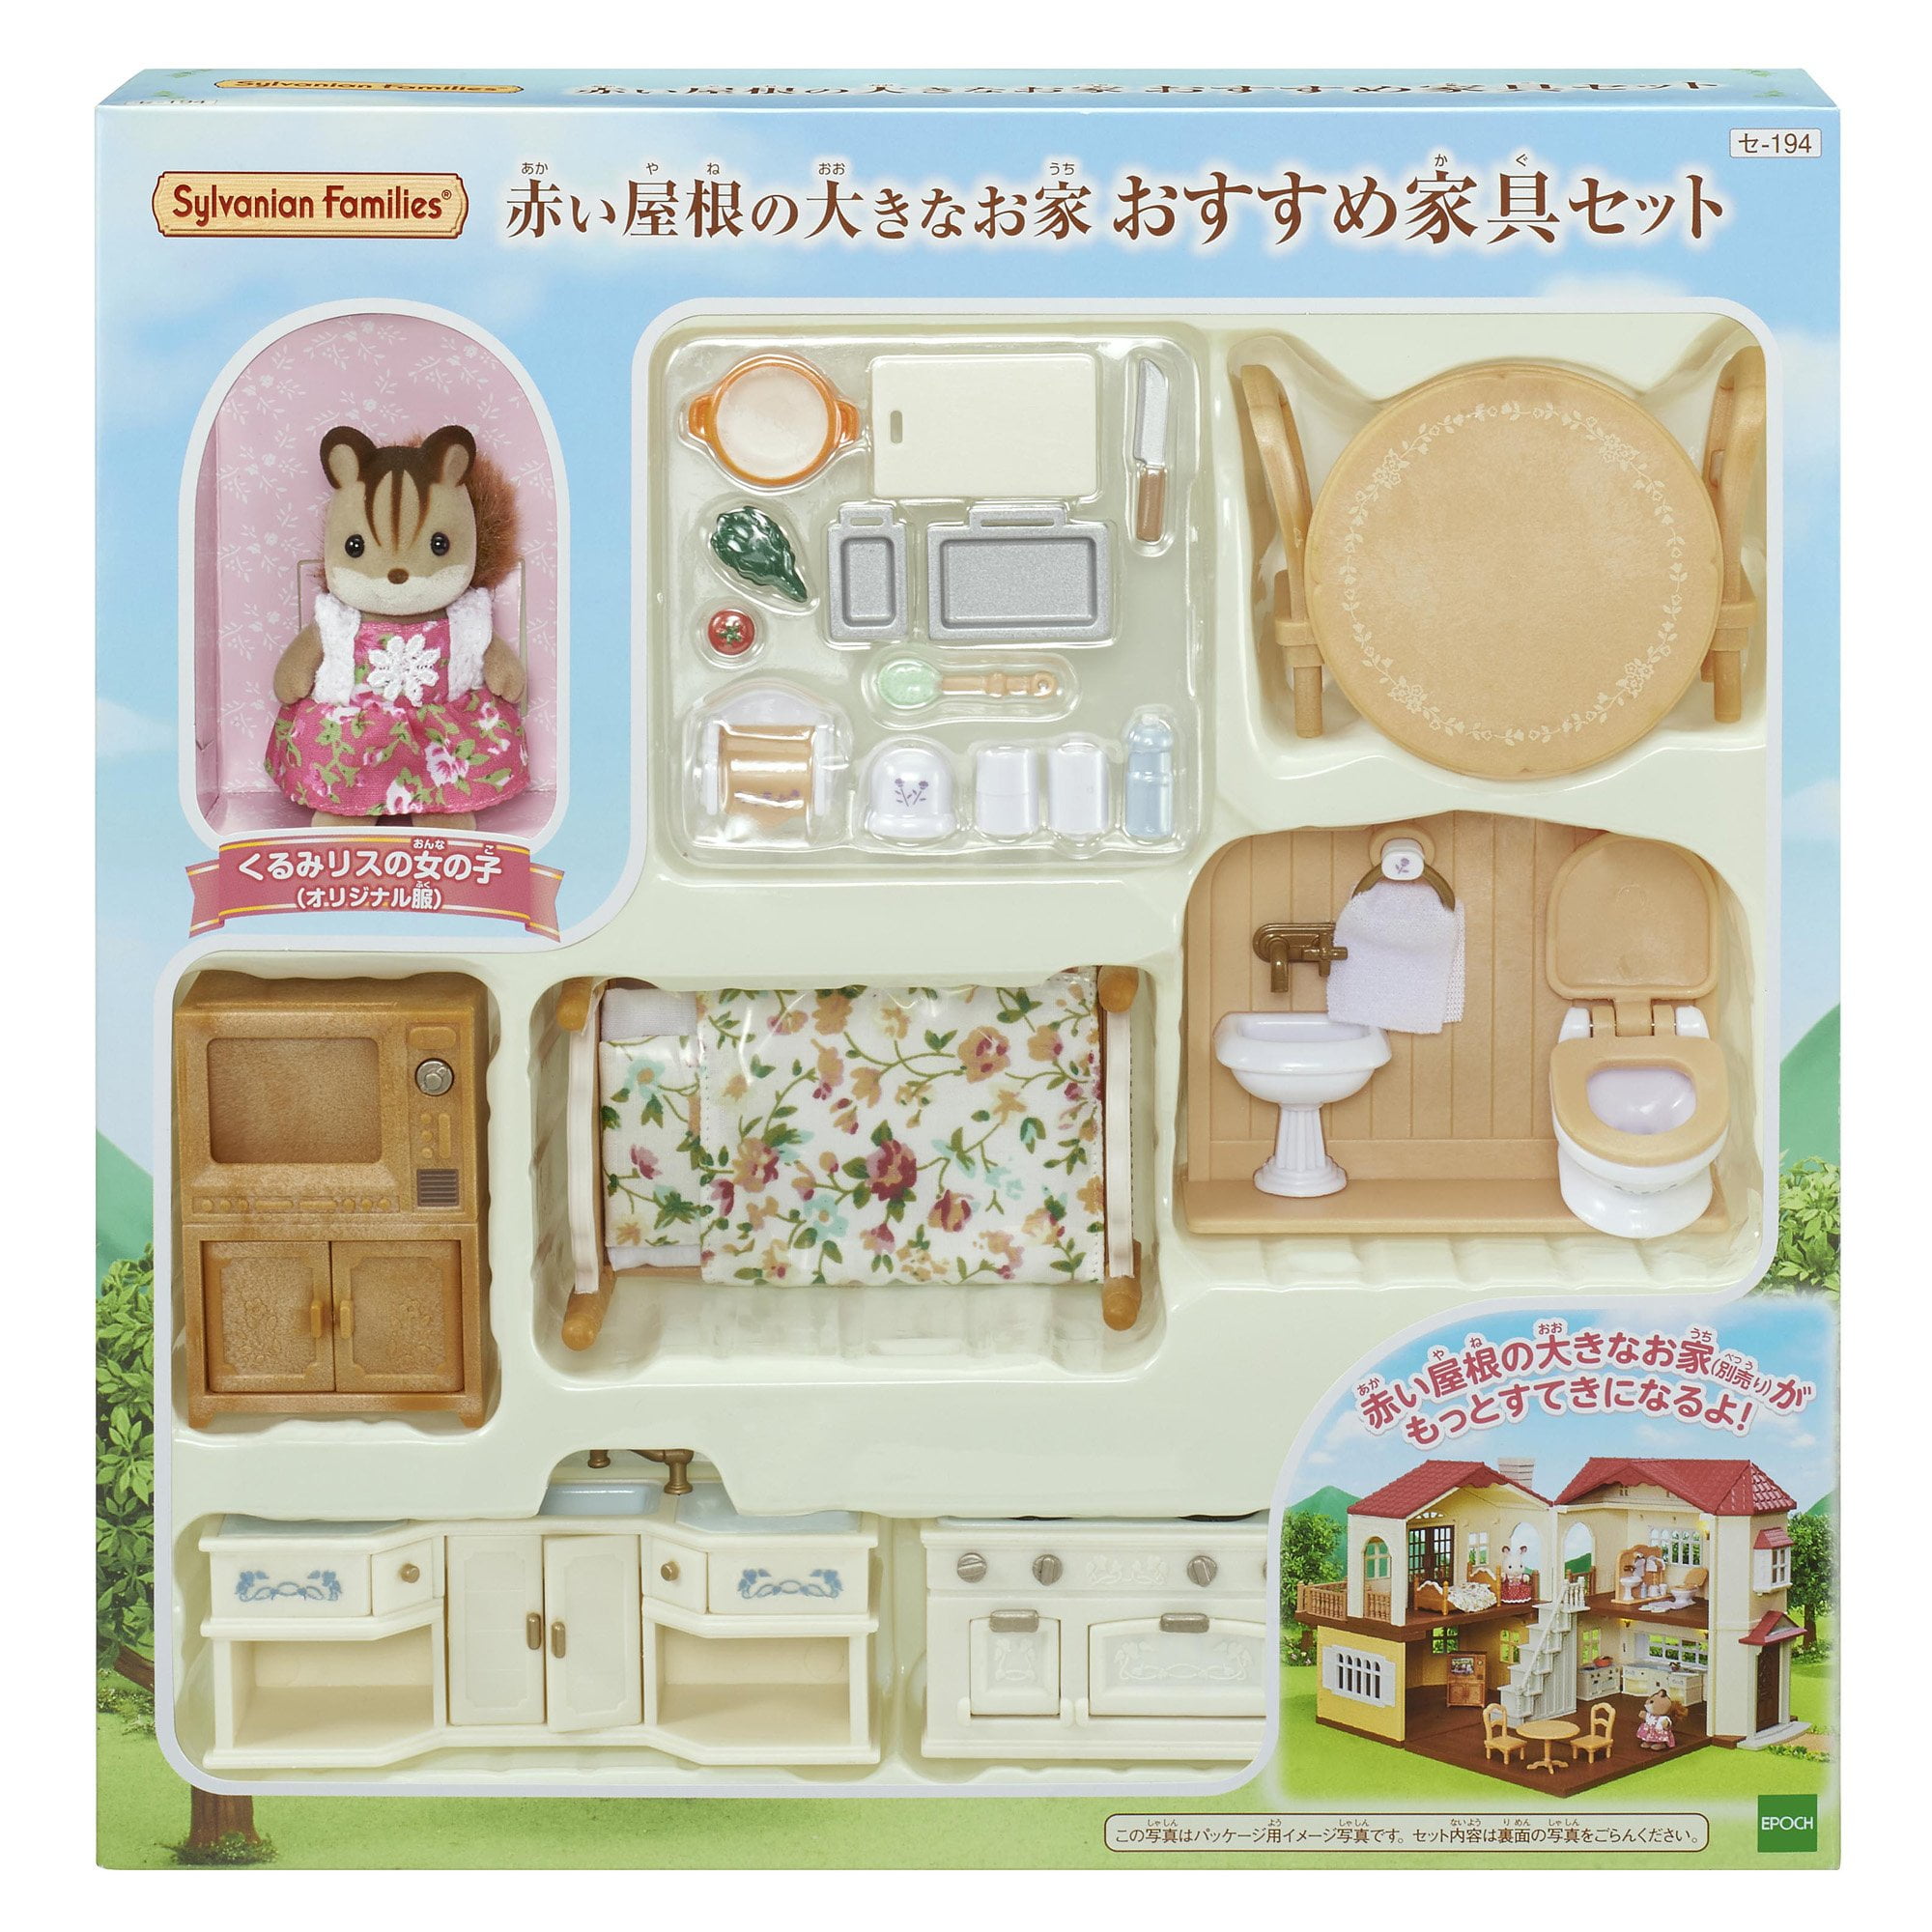 Sylvanian Families Recommended furniture set Se-158 